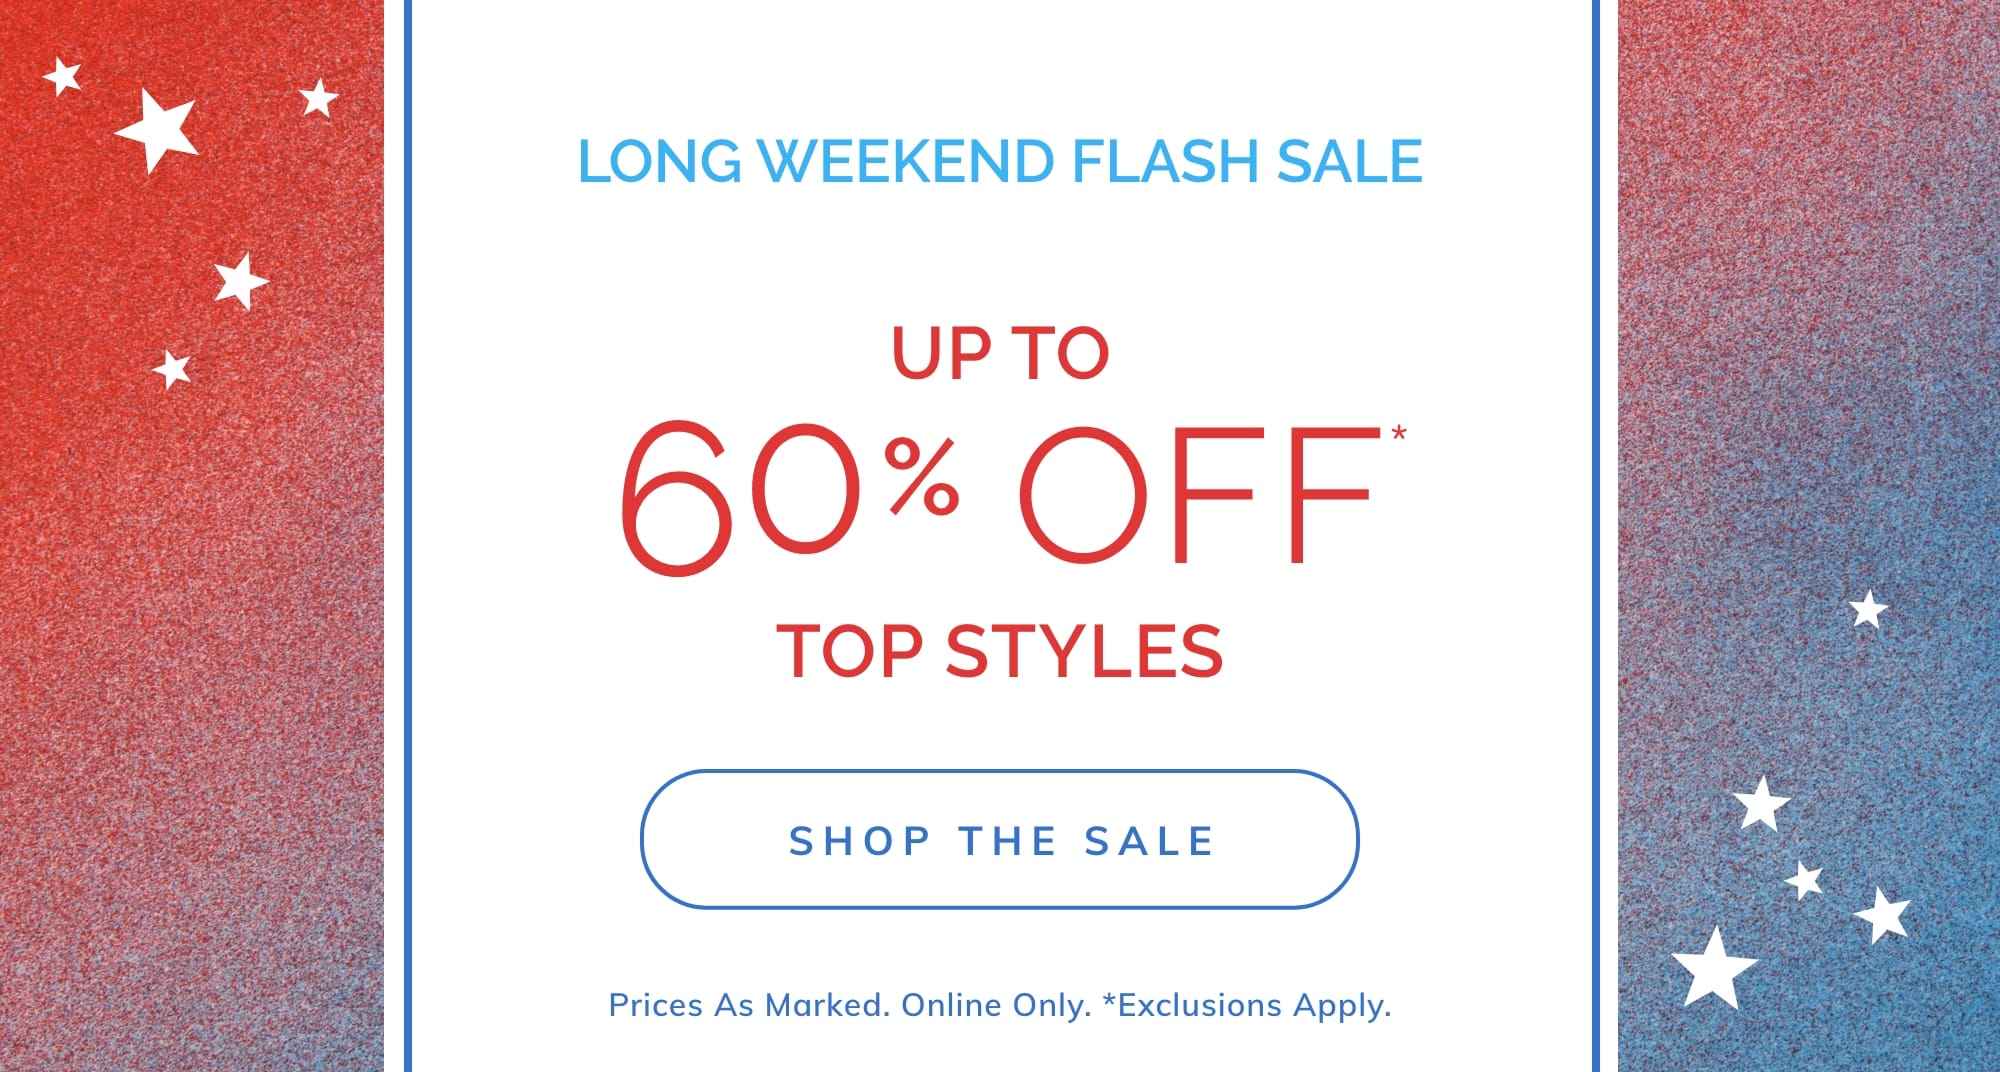 UP TO 60% OFF* TOP STYLES